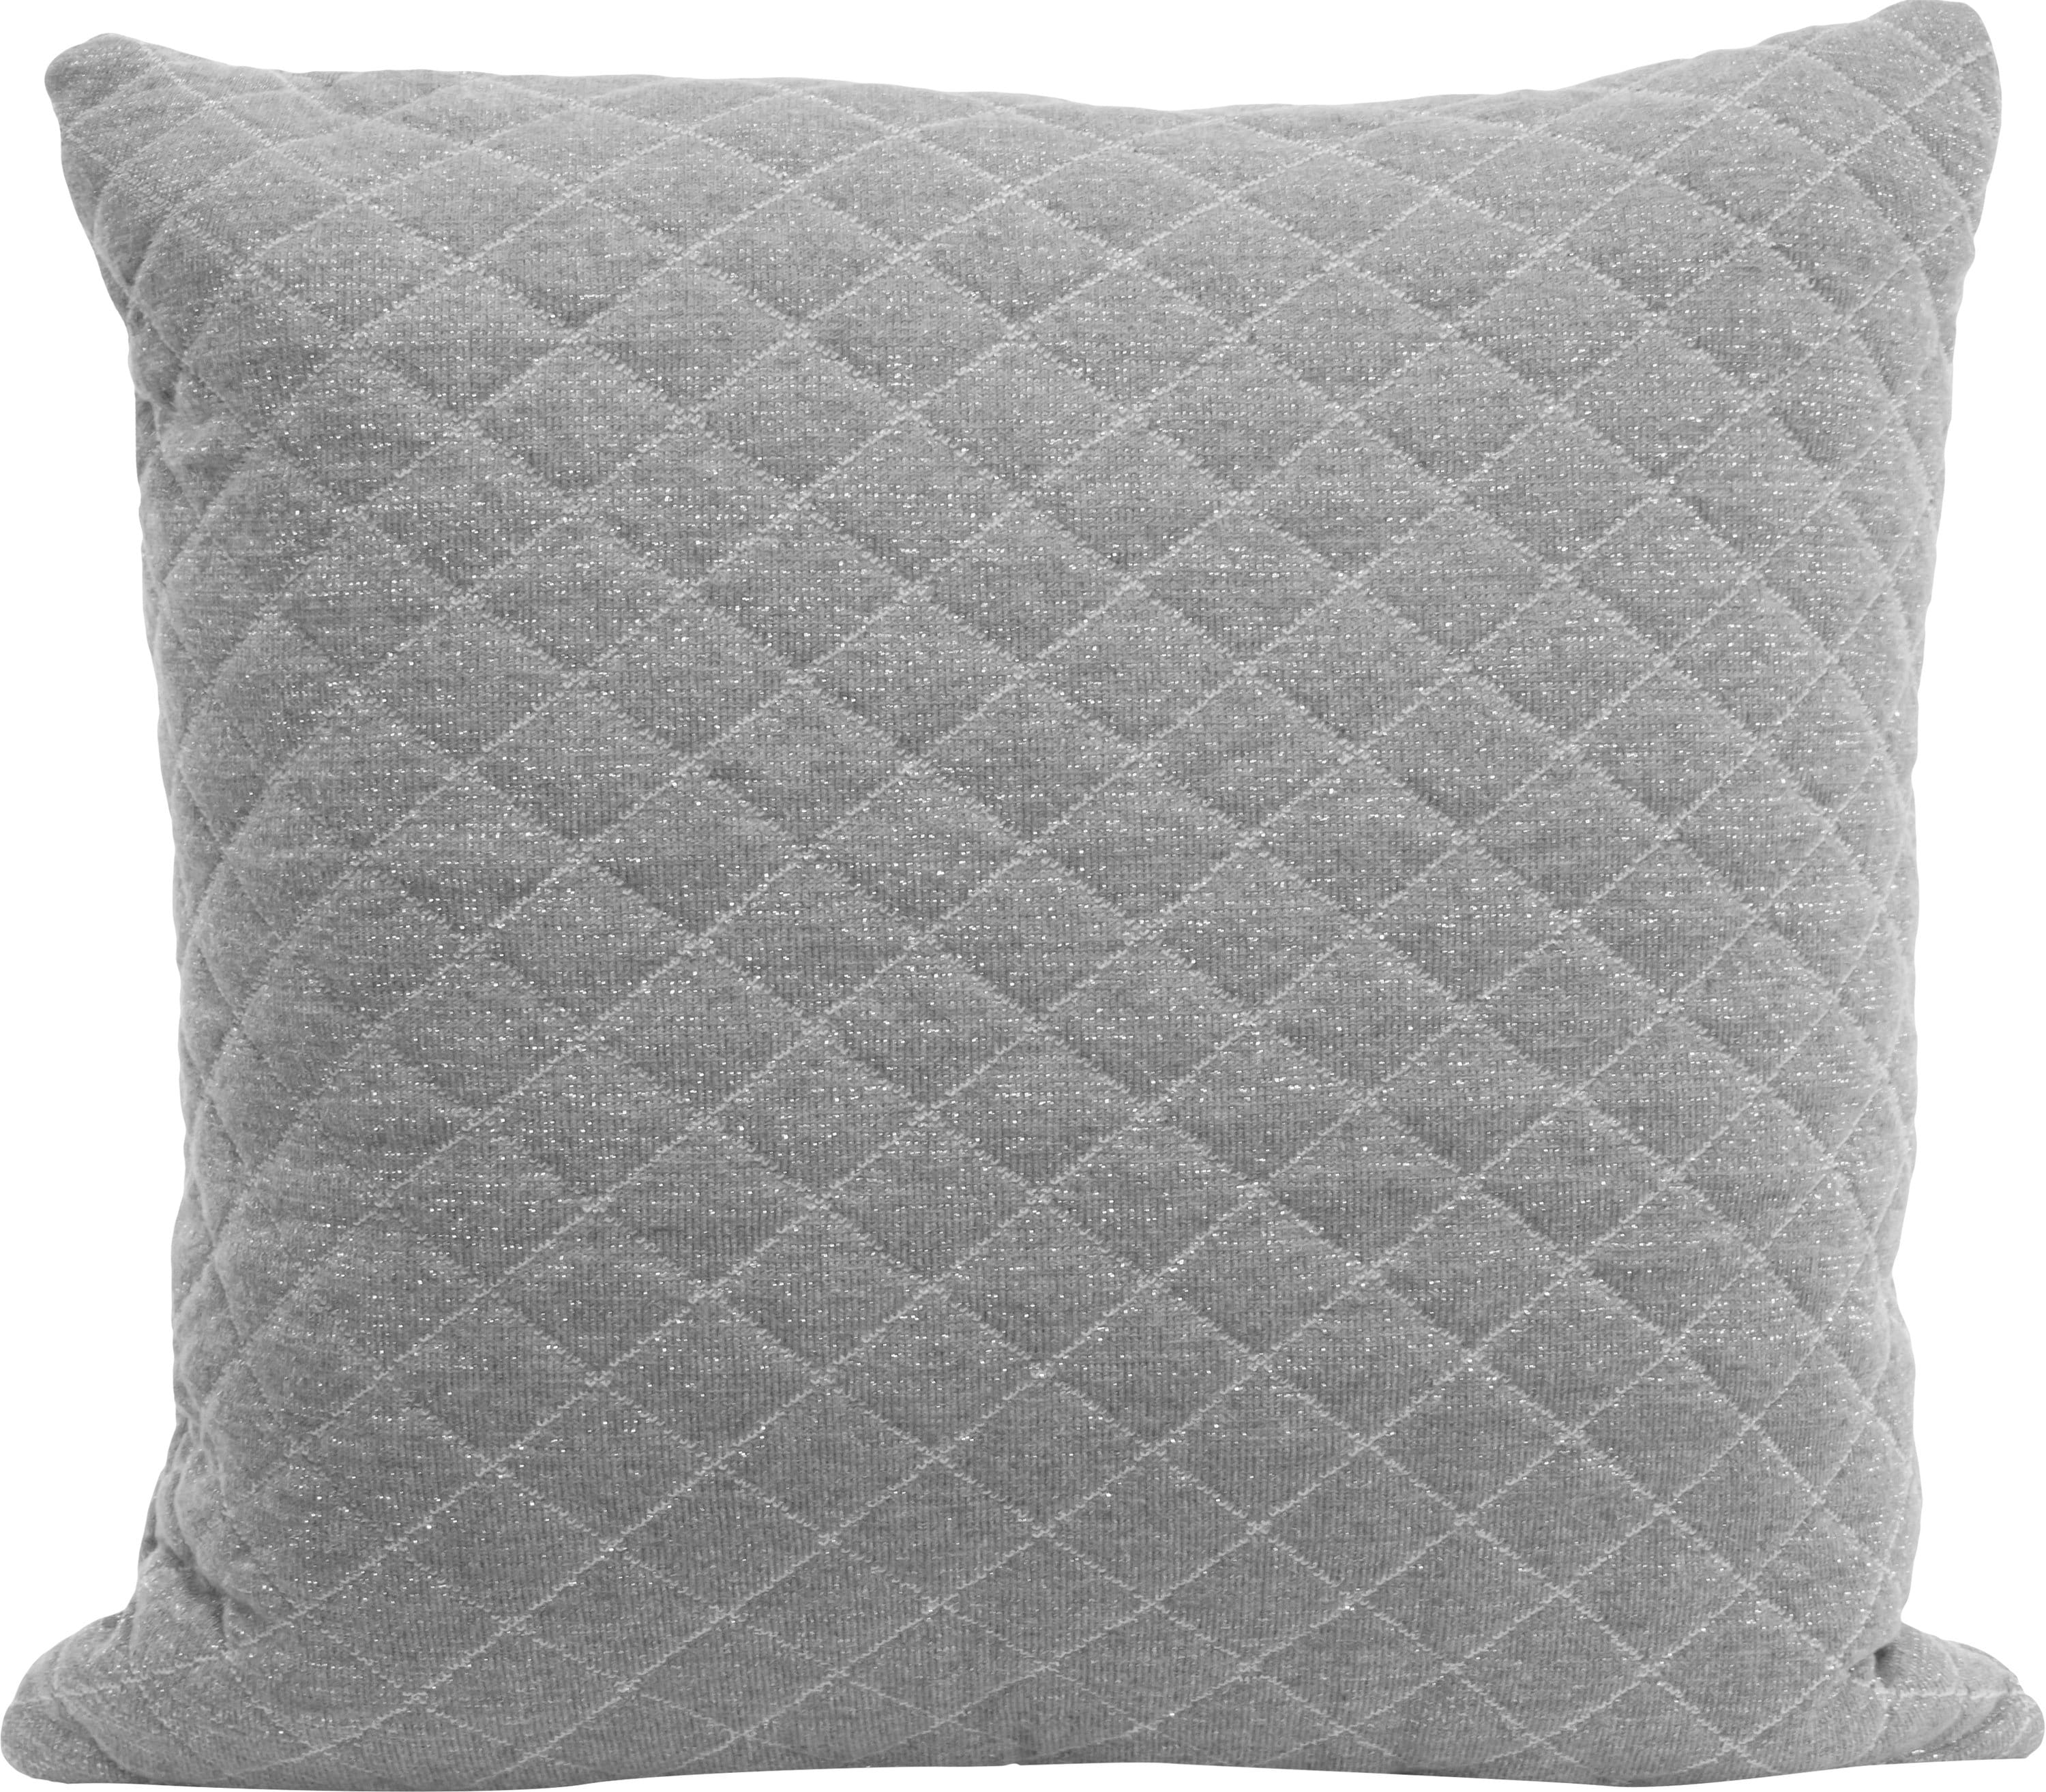 Westex 19-in x 19-in Gray Cotton/Polyester Blend Indoor Decorative Pillow | 653019